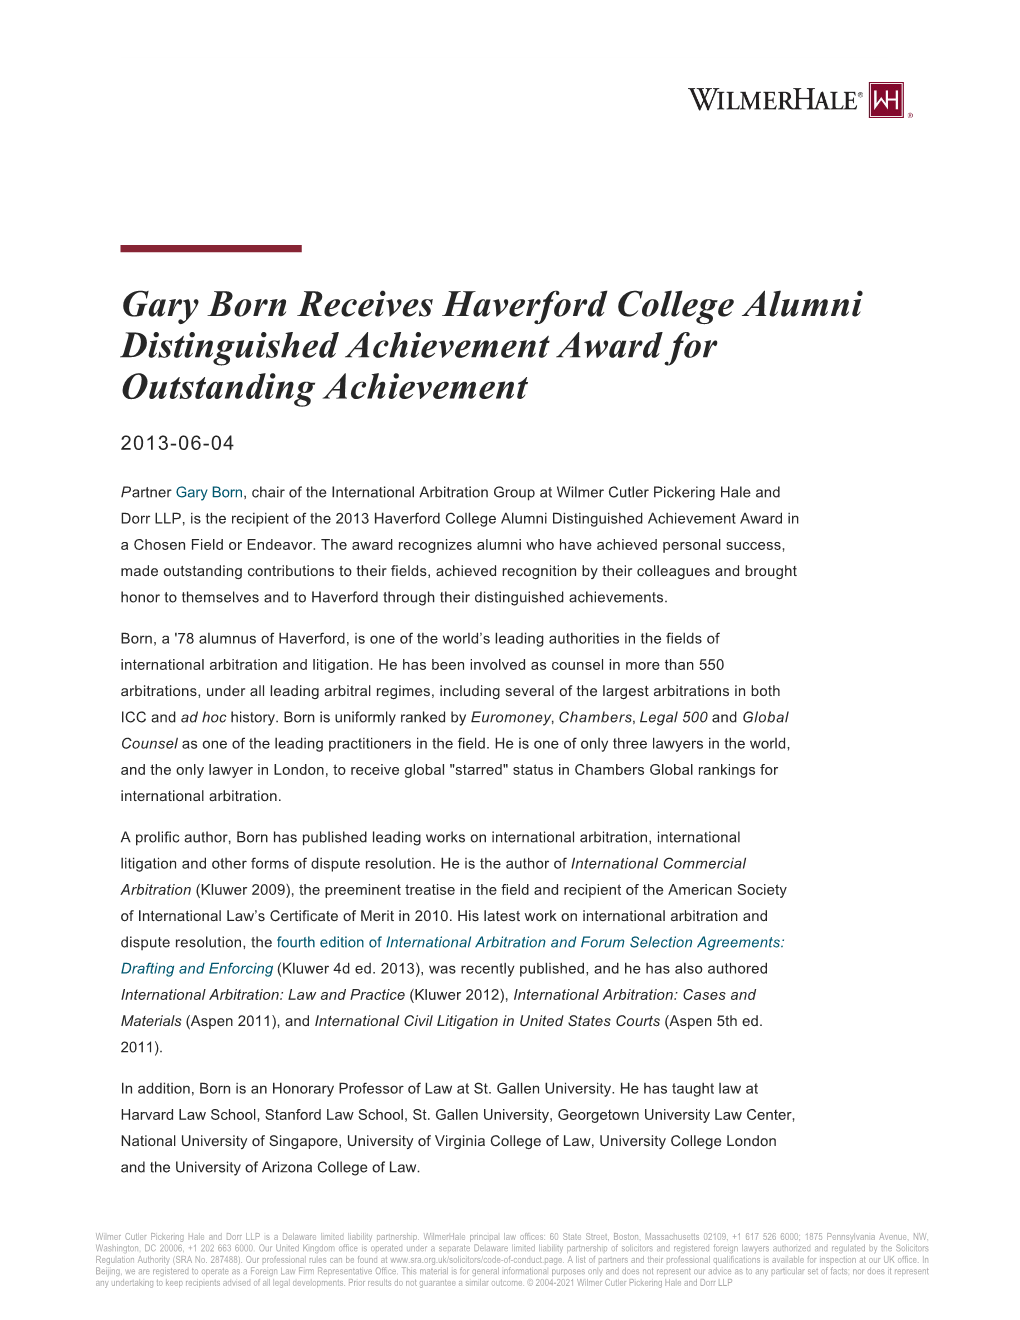 Gary Born Receives Haverford College Alumni Distinguished Achievement Award for Outstanding Achievement